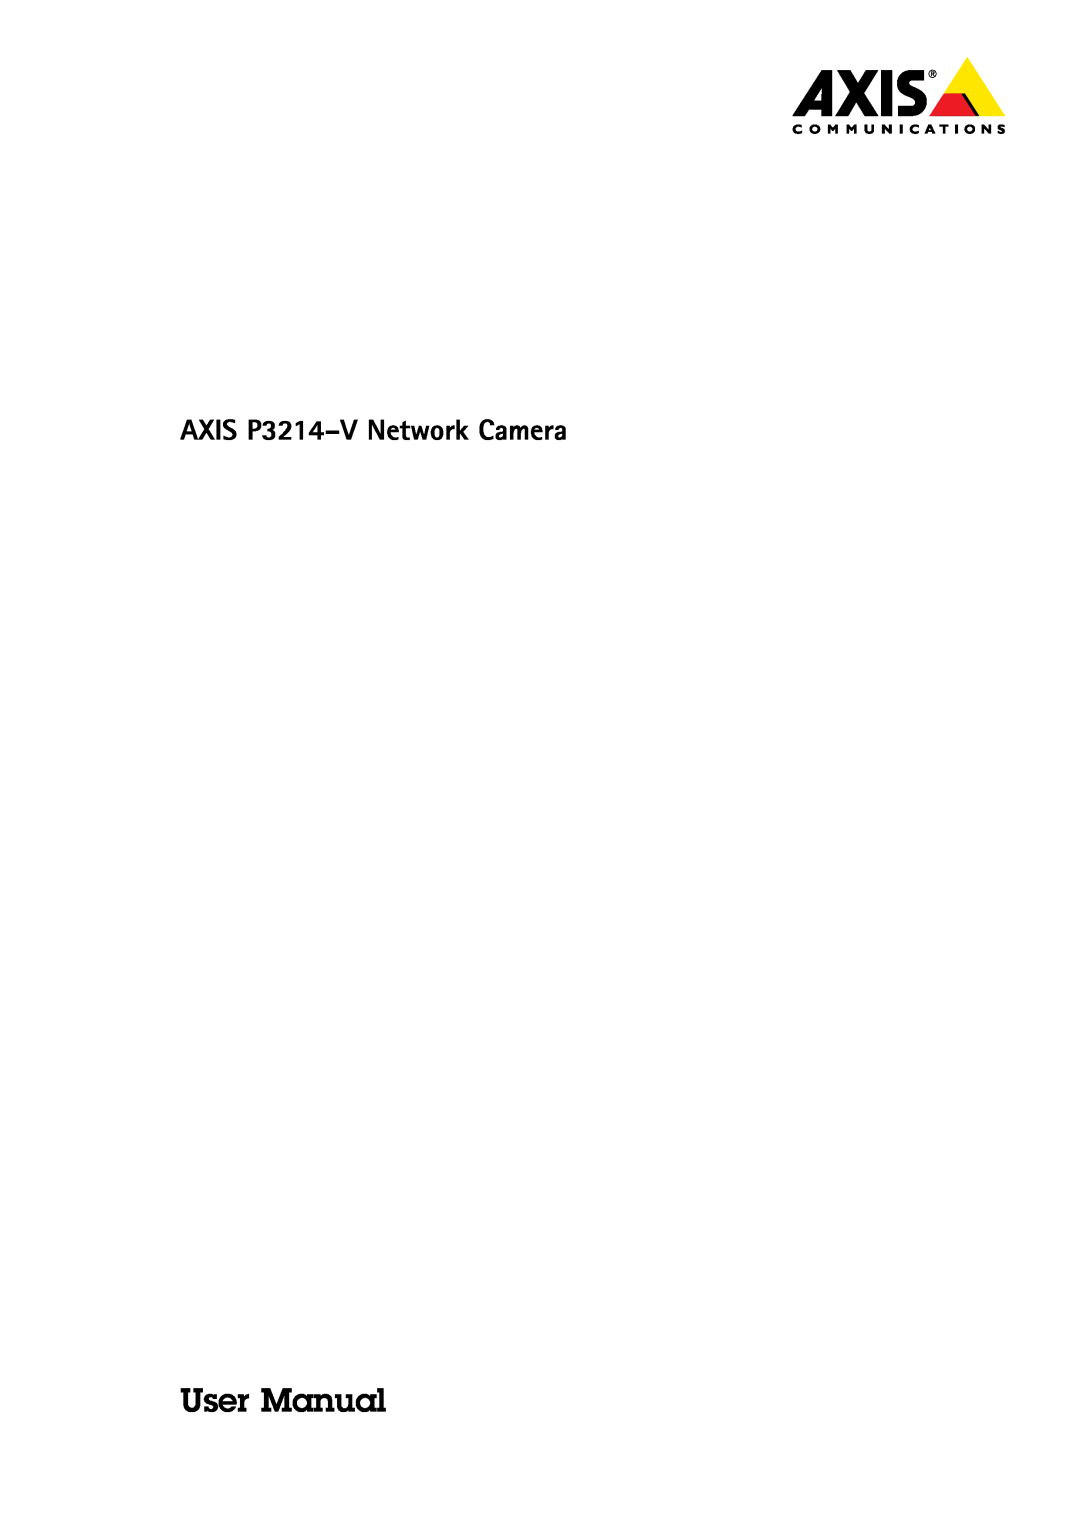 Axis Communications user manual AXIS P3214-V Network Camera 